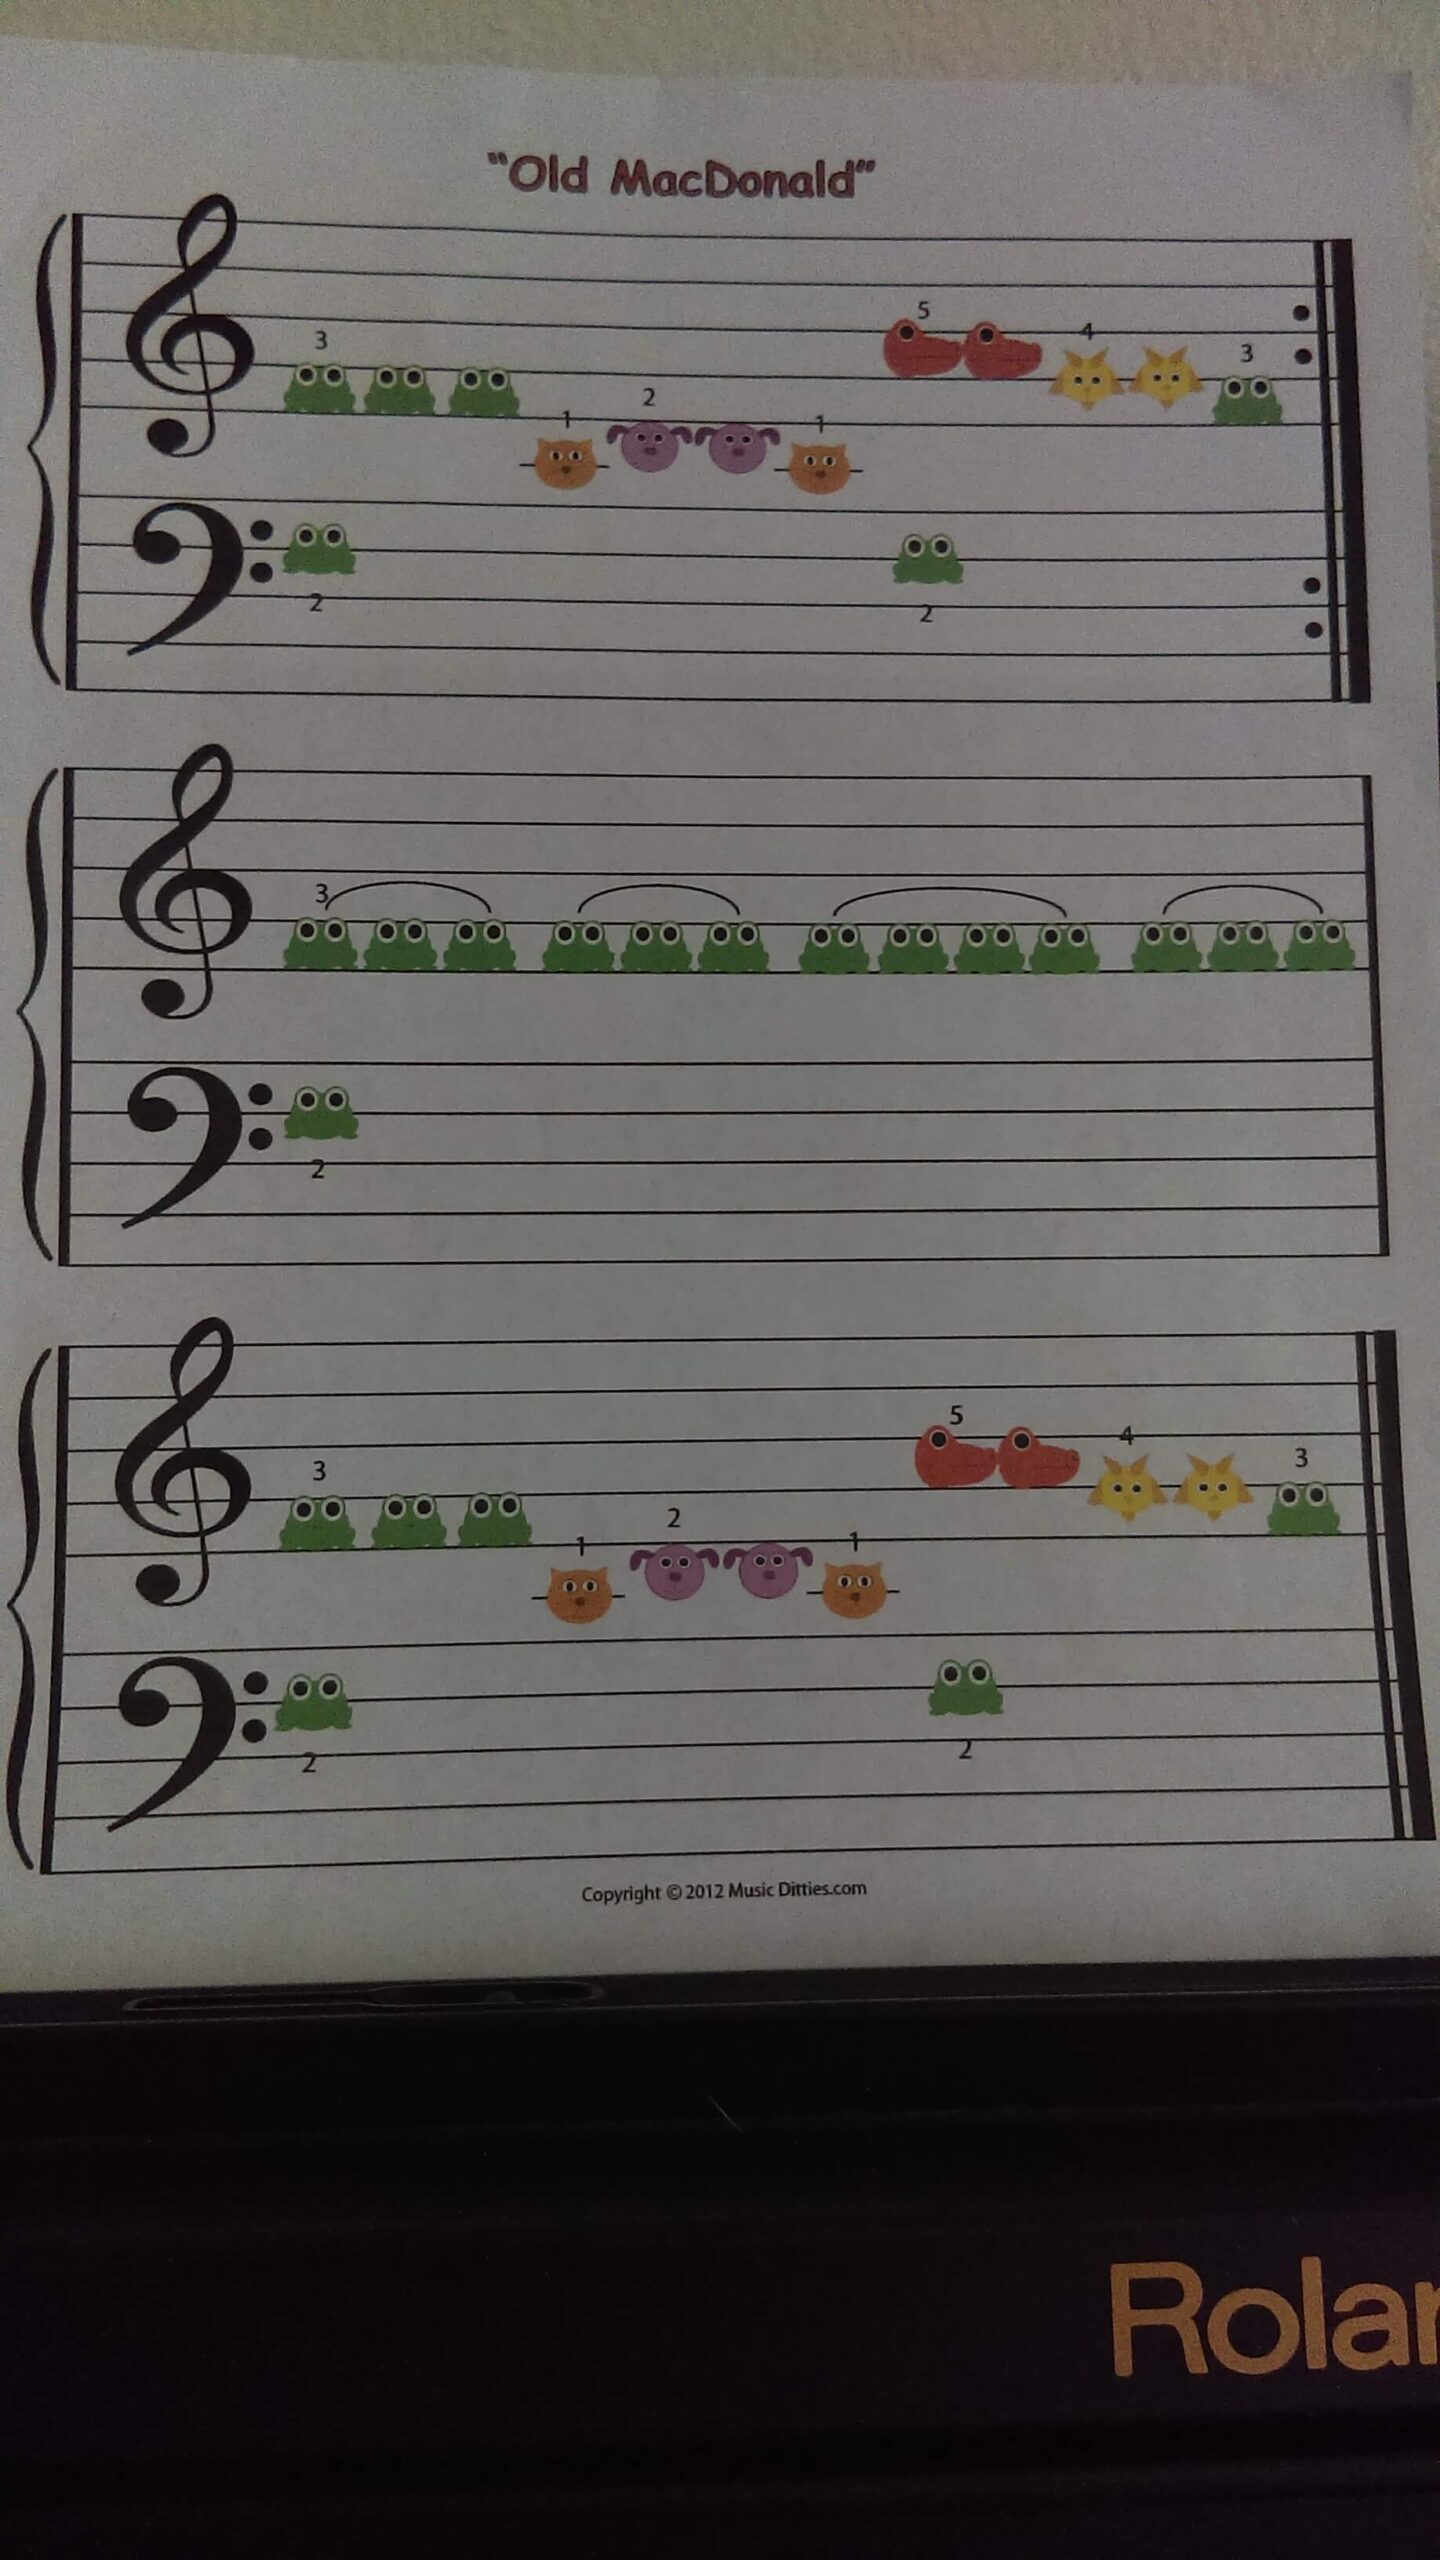 A sheet of music with notes and frogs on it.